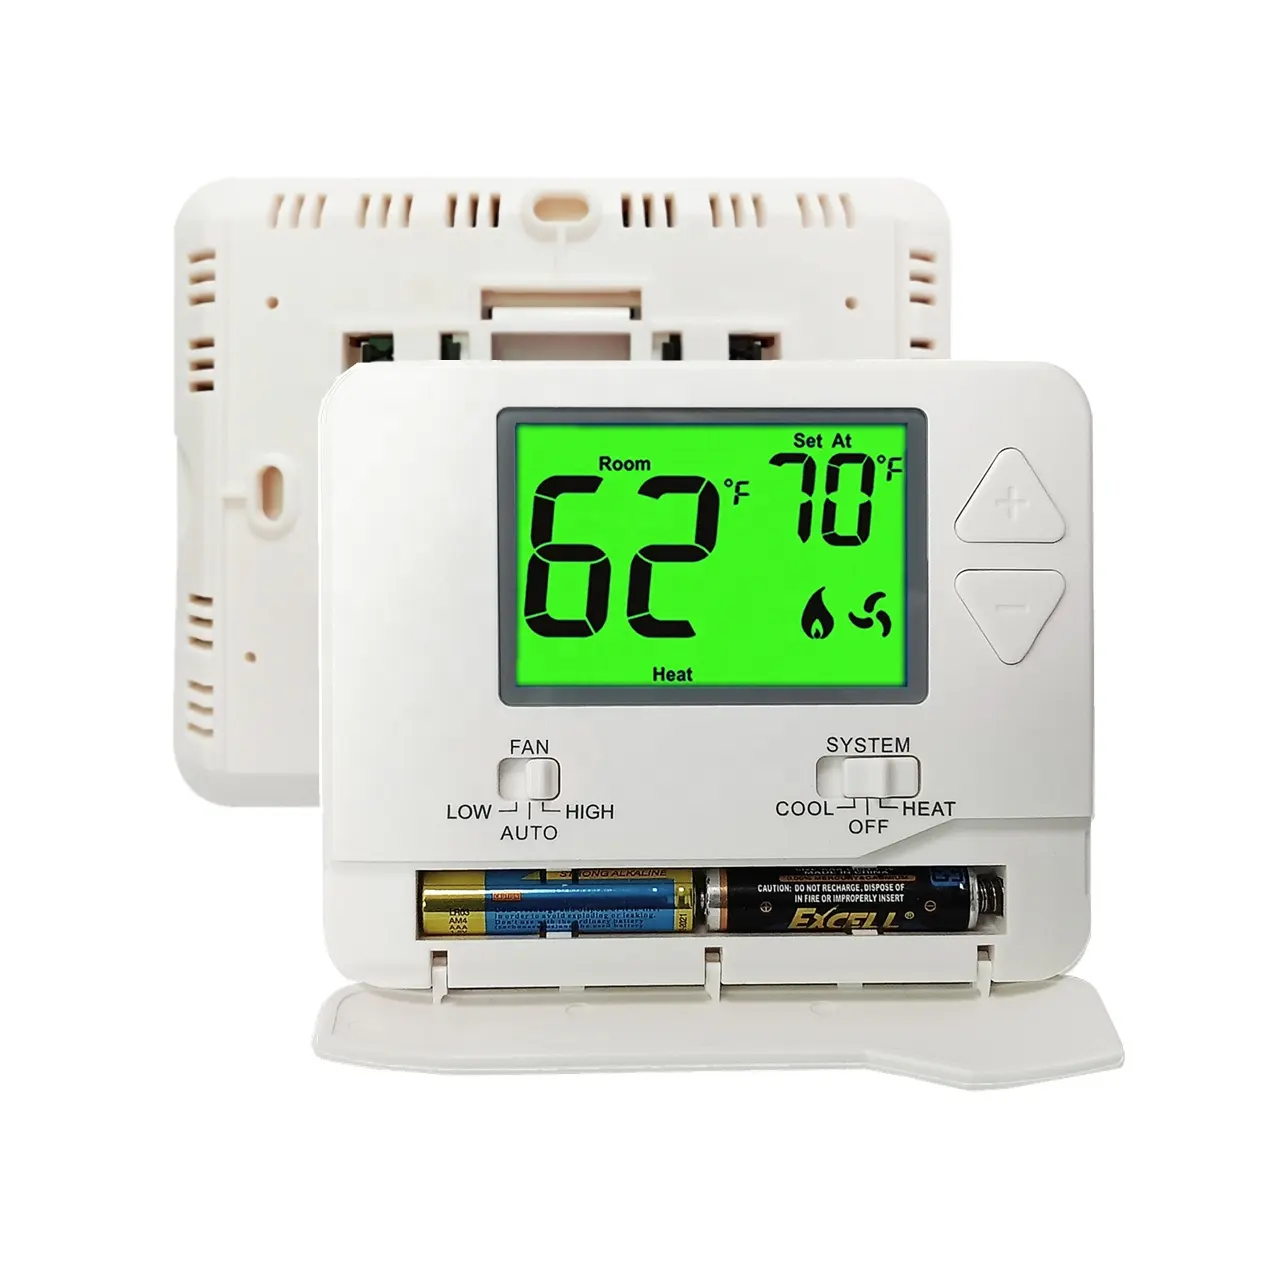 Temperature Control LCD Display Home Appliance Parts Heating Thermostat